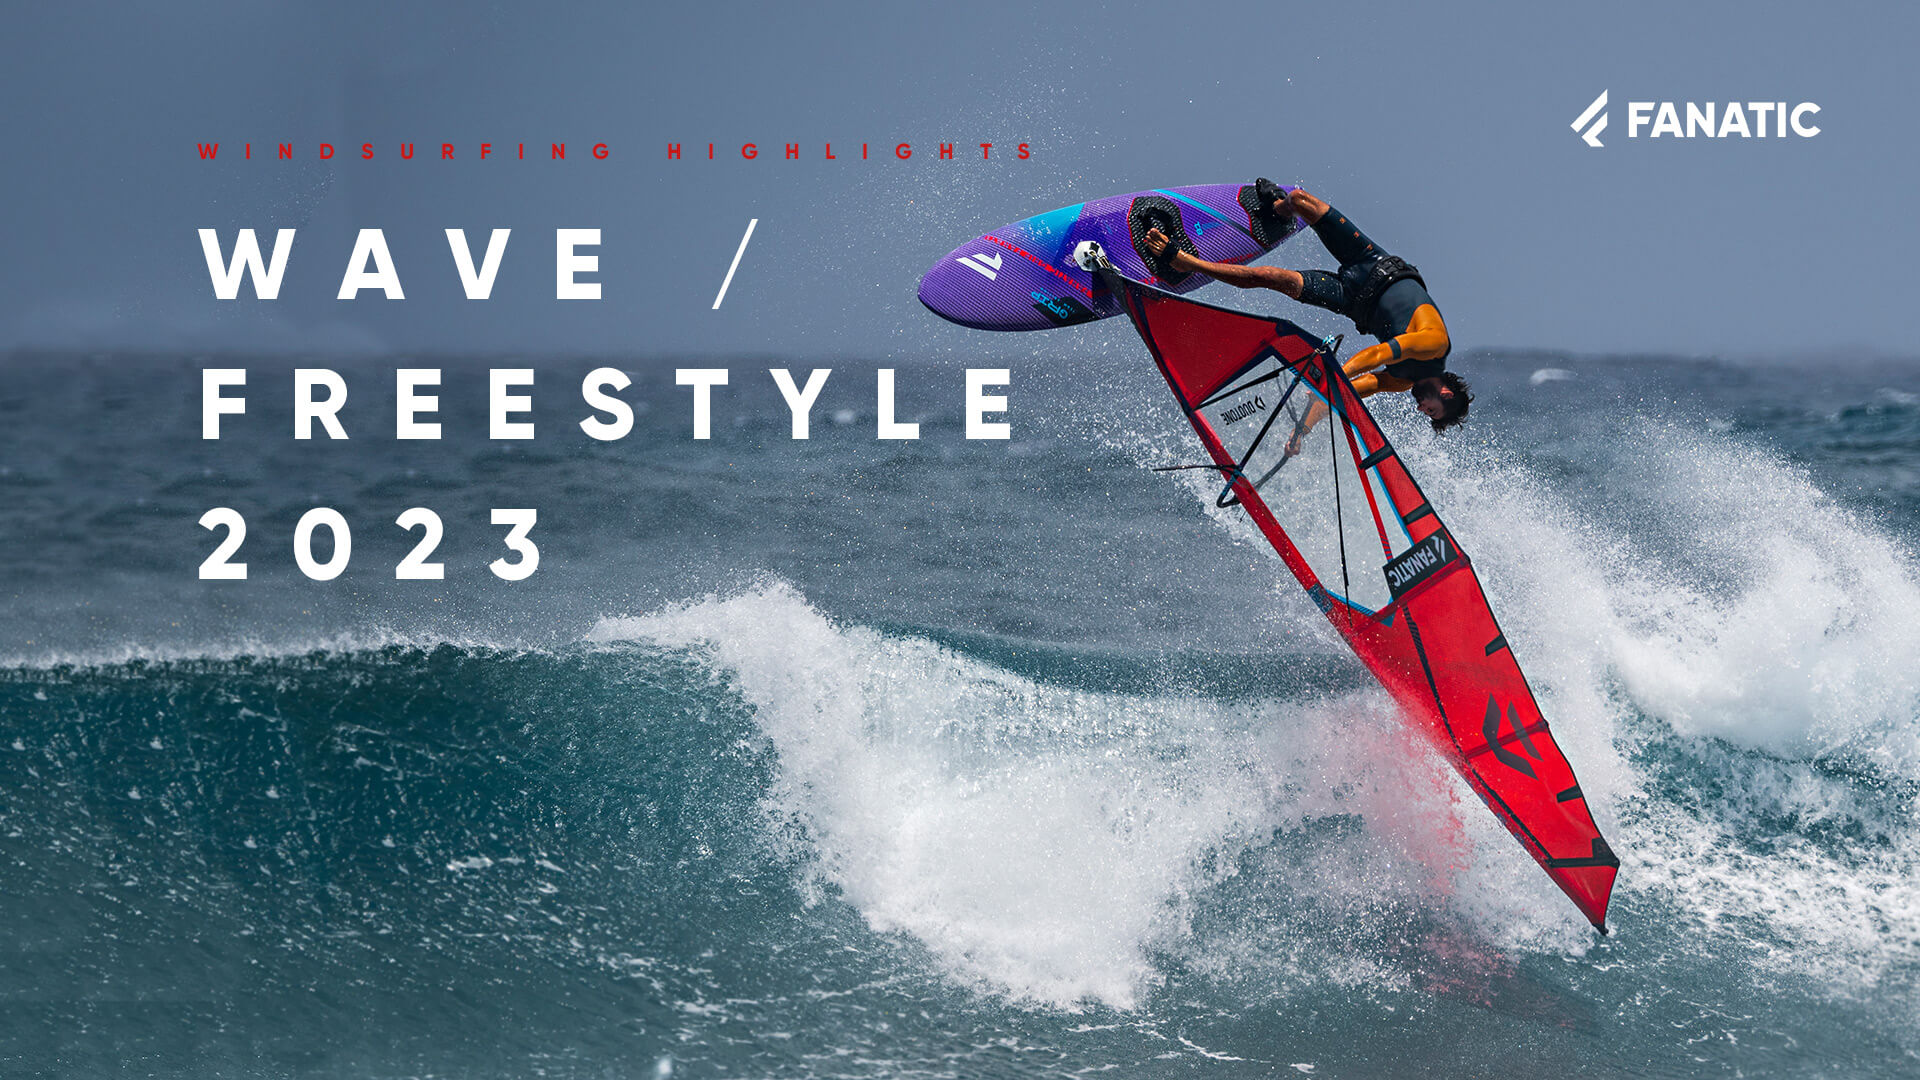 Fanatic X Duotone Windsurfing 2023 - Wave & Freestyle - Highlight Clip